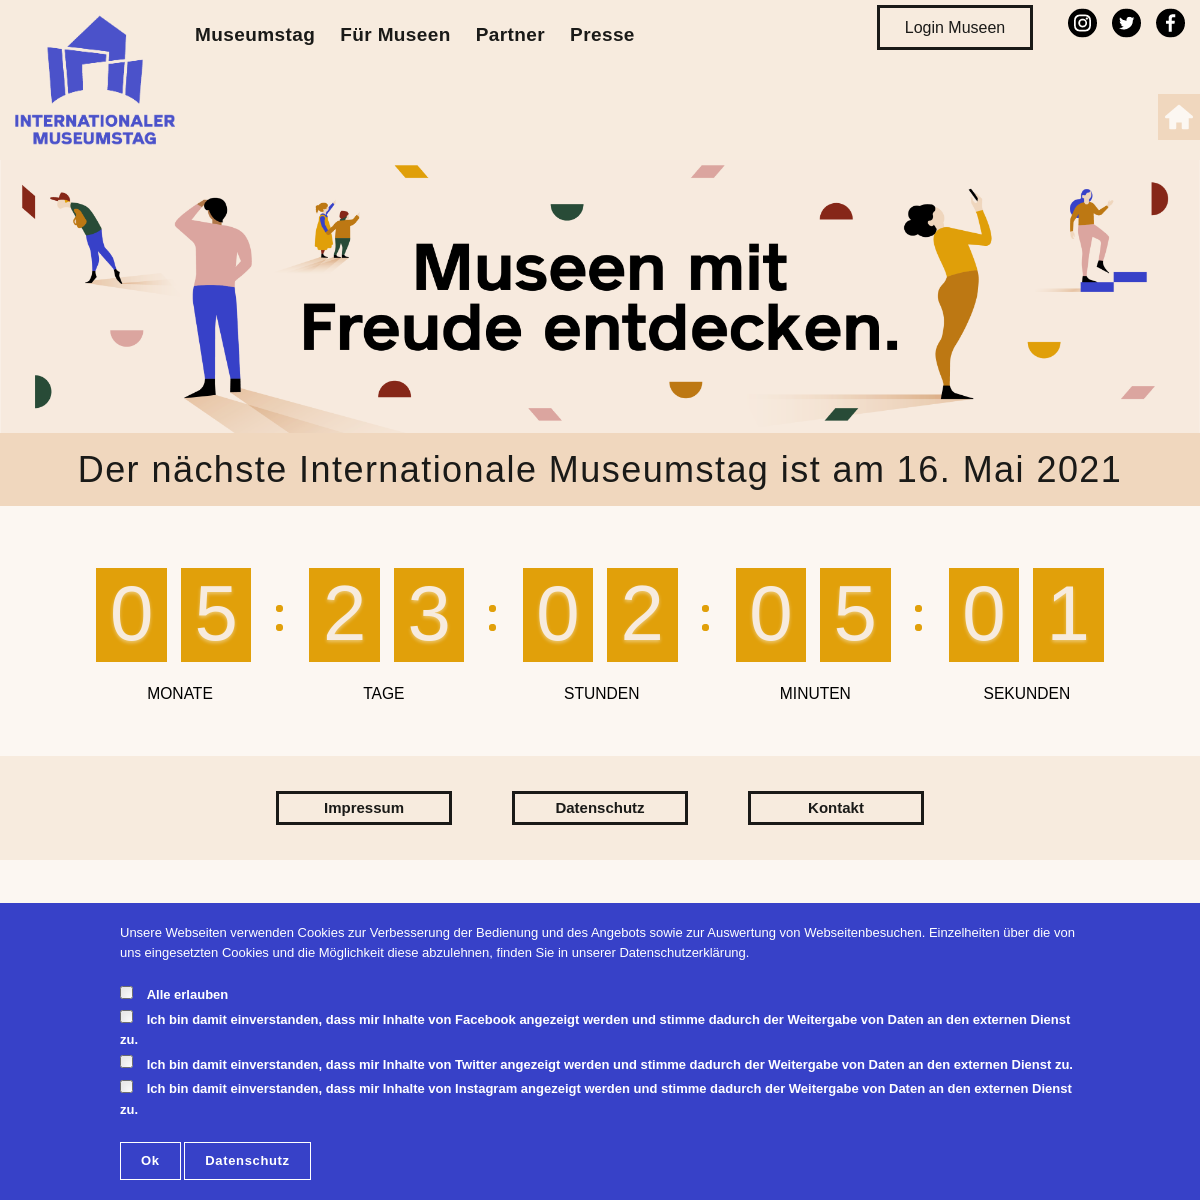 A complete backup of museumstag.de